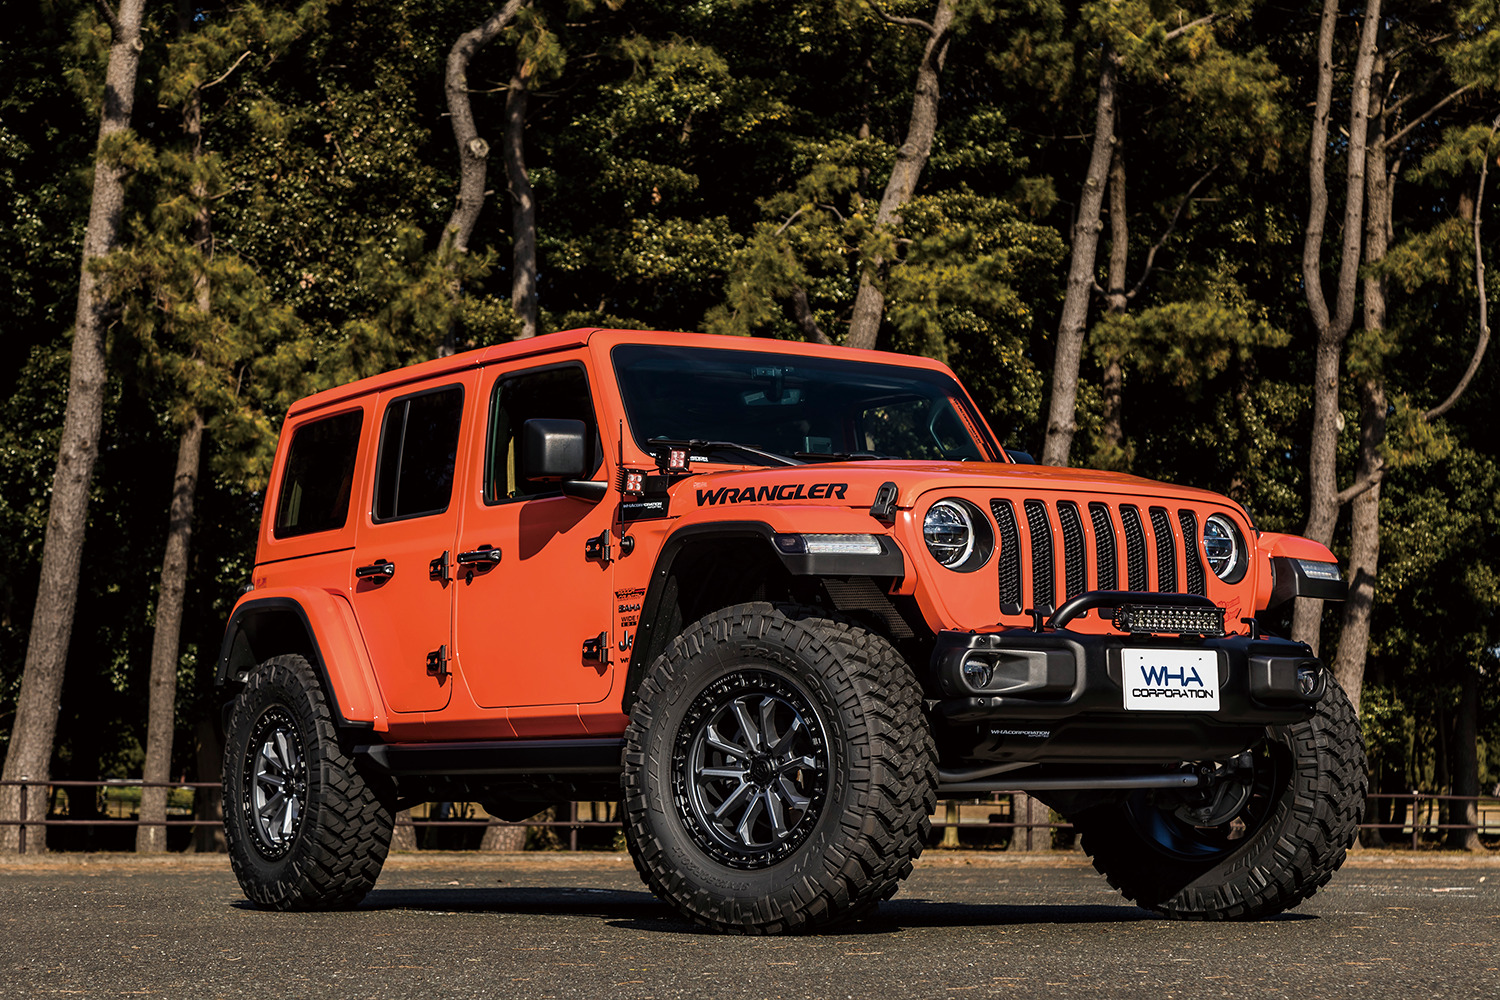 JEEP Wrangler 50mm Wide Body Kit by WHA corporation